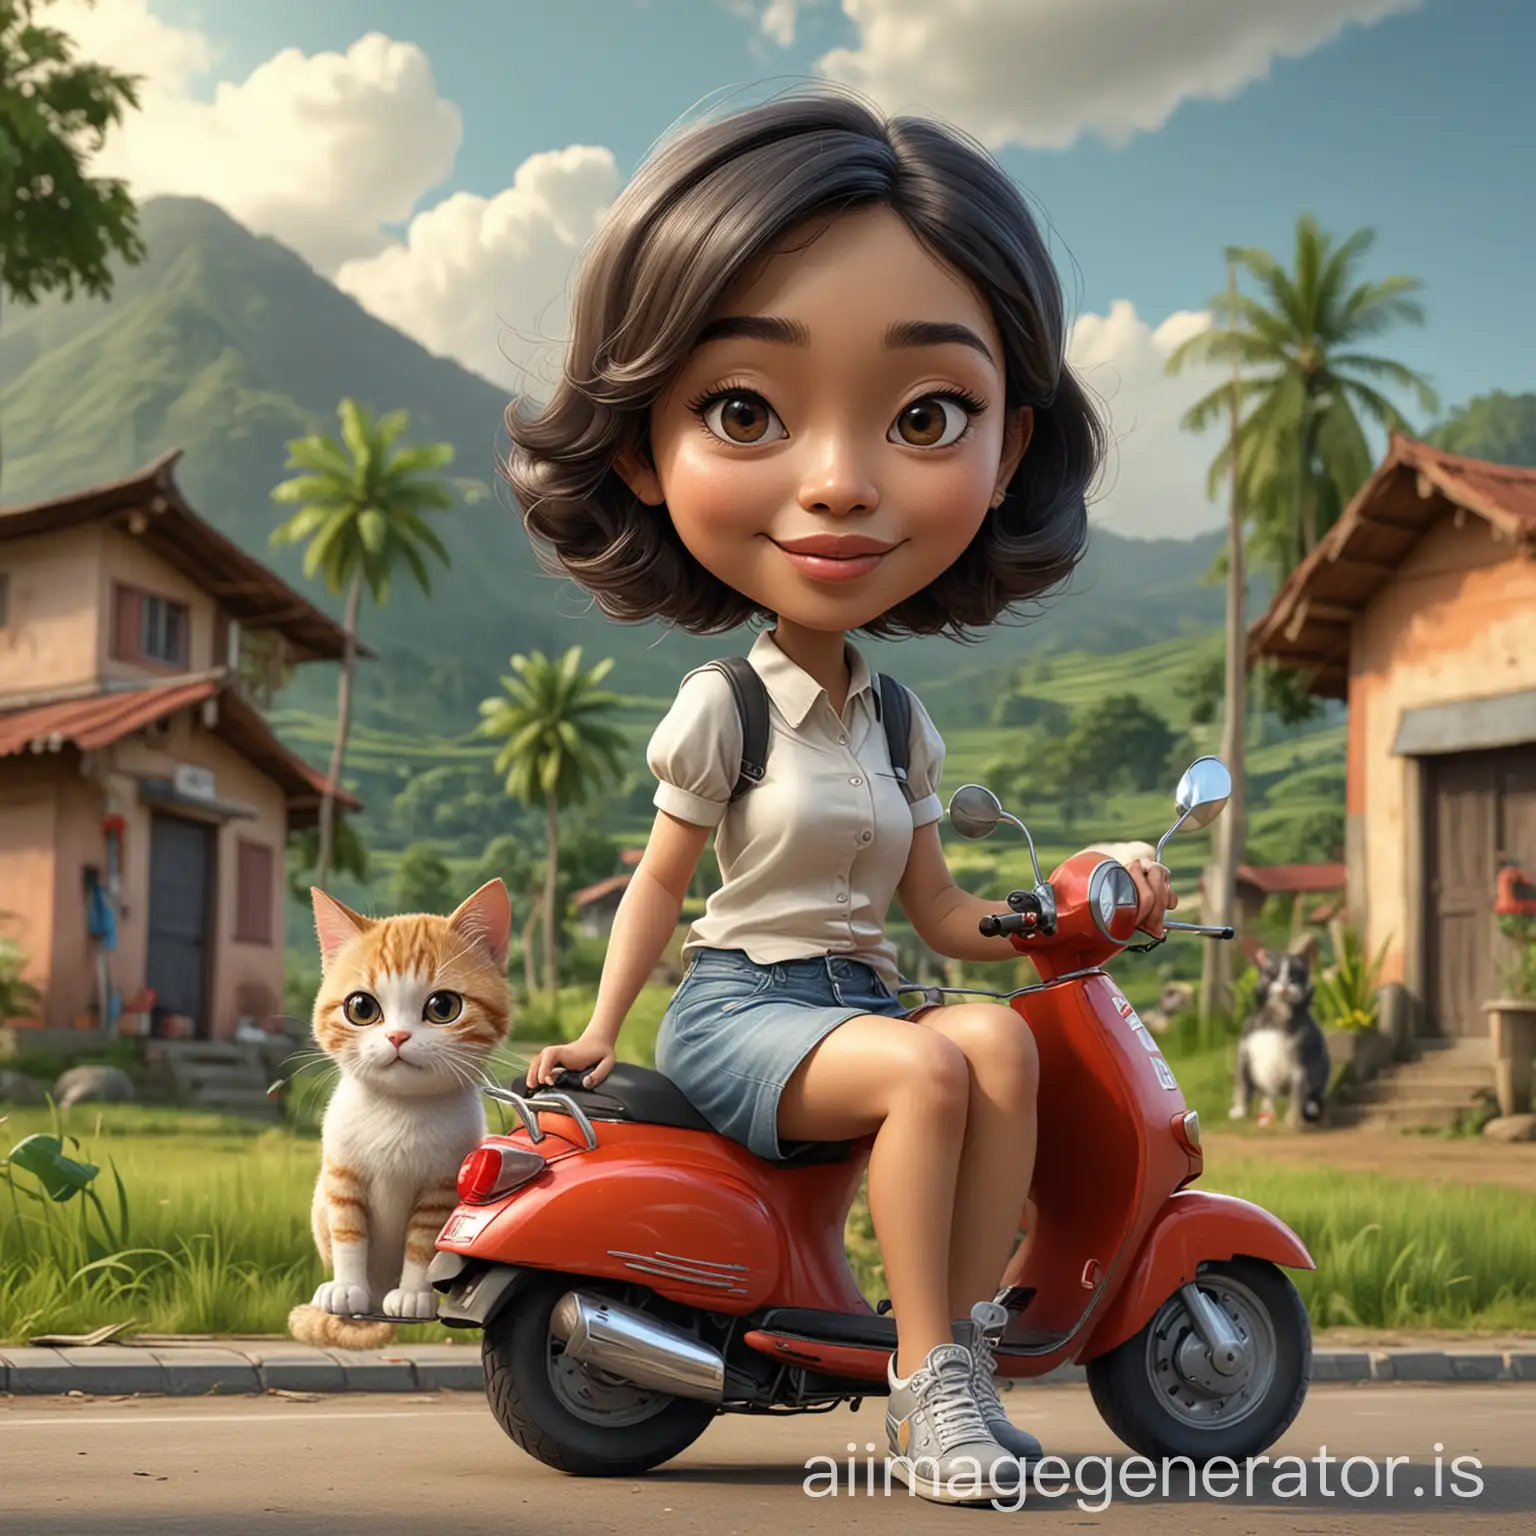 3d caricature, indonesian woman with short wavy hair, sitting on a scooter, a cute cat beside, rural background